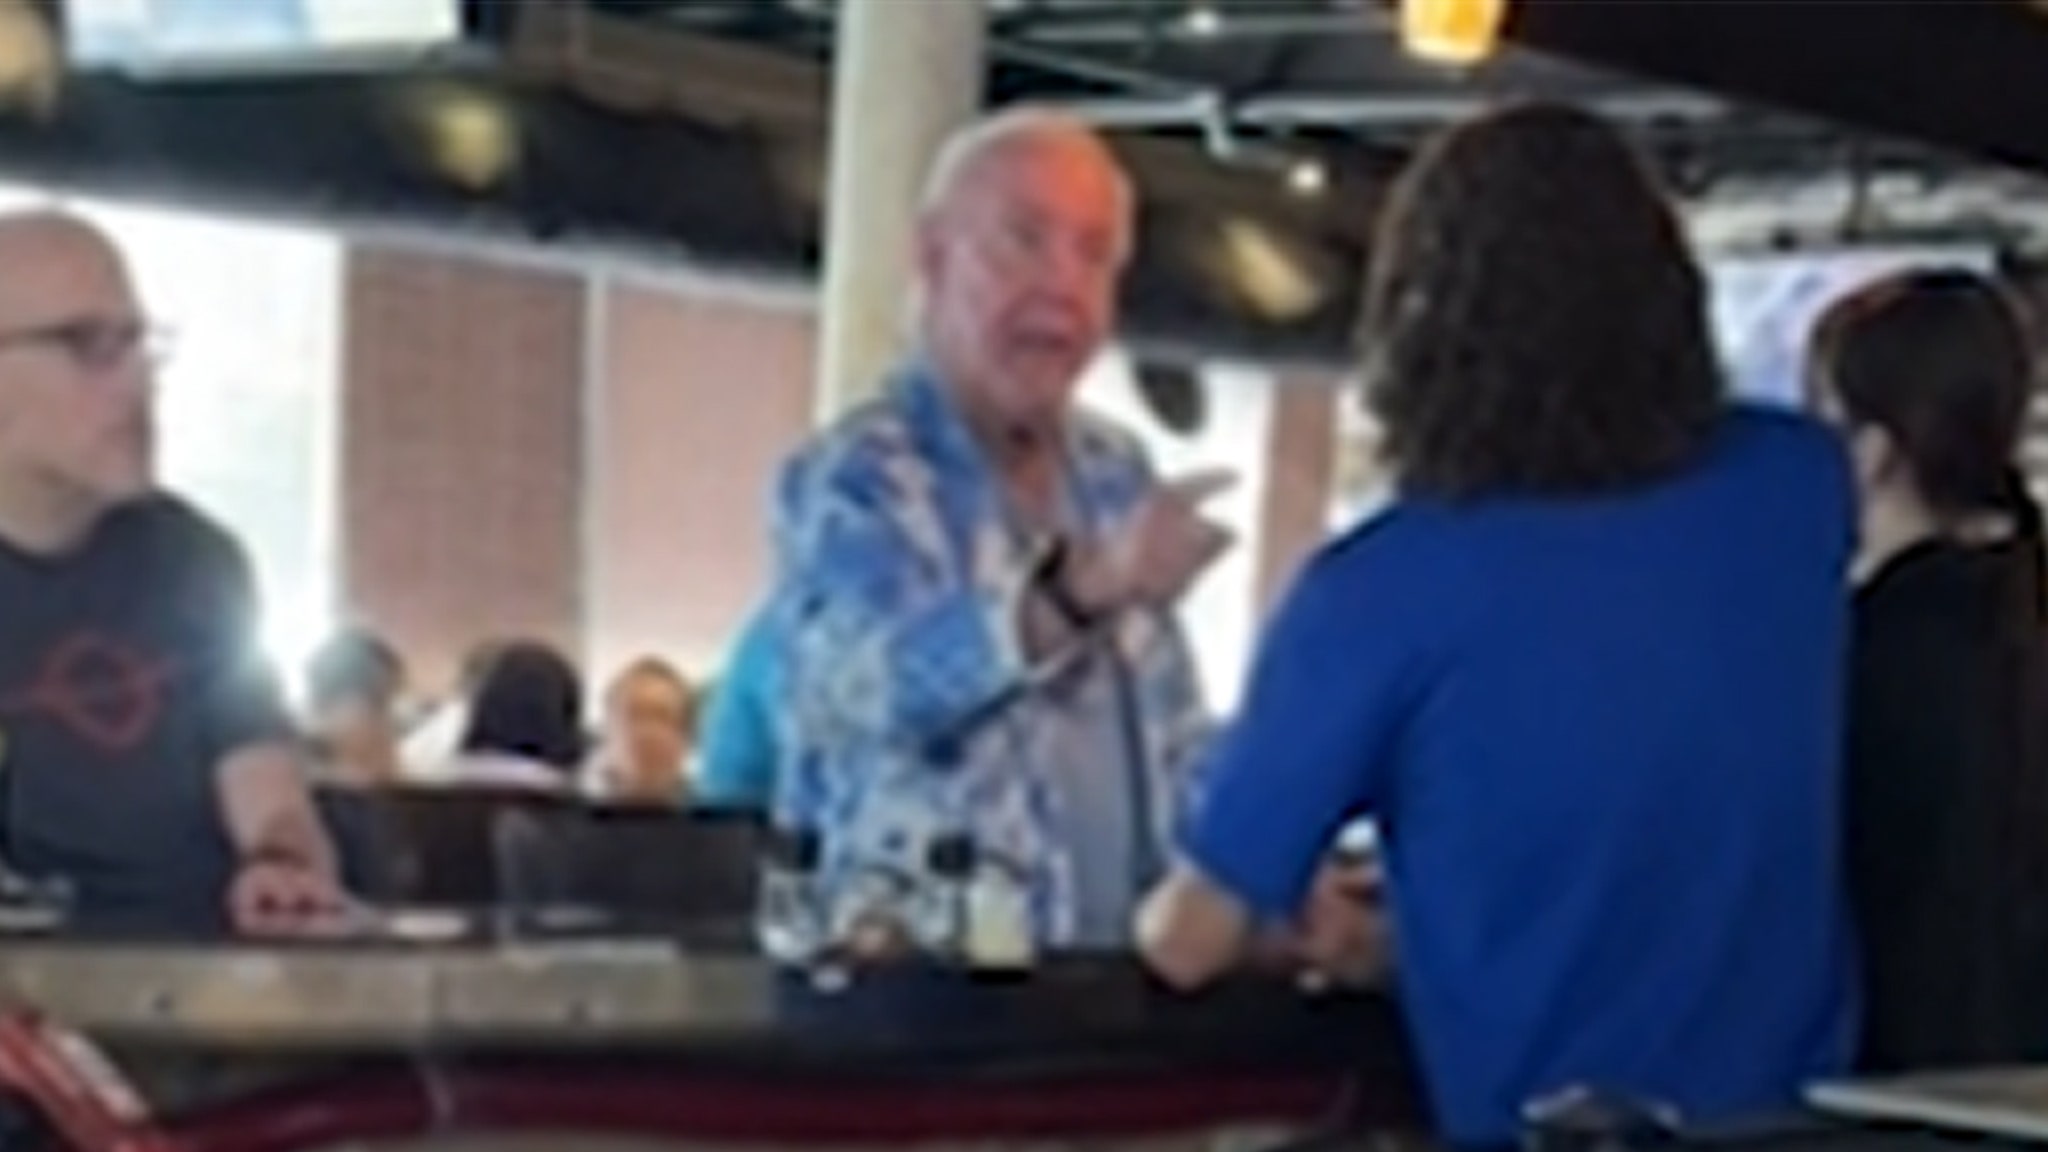 Ric Flair Heated Altercation W/ Bar Employee Caught On Video, Fight Nearly Ensues